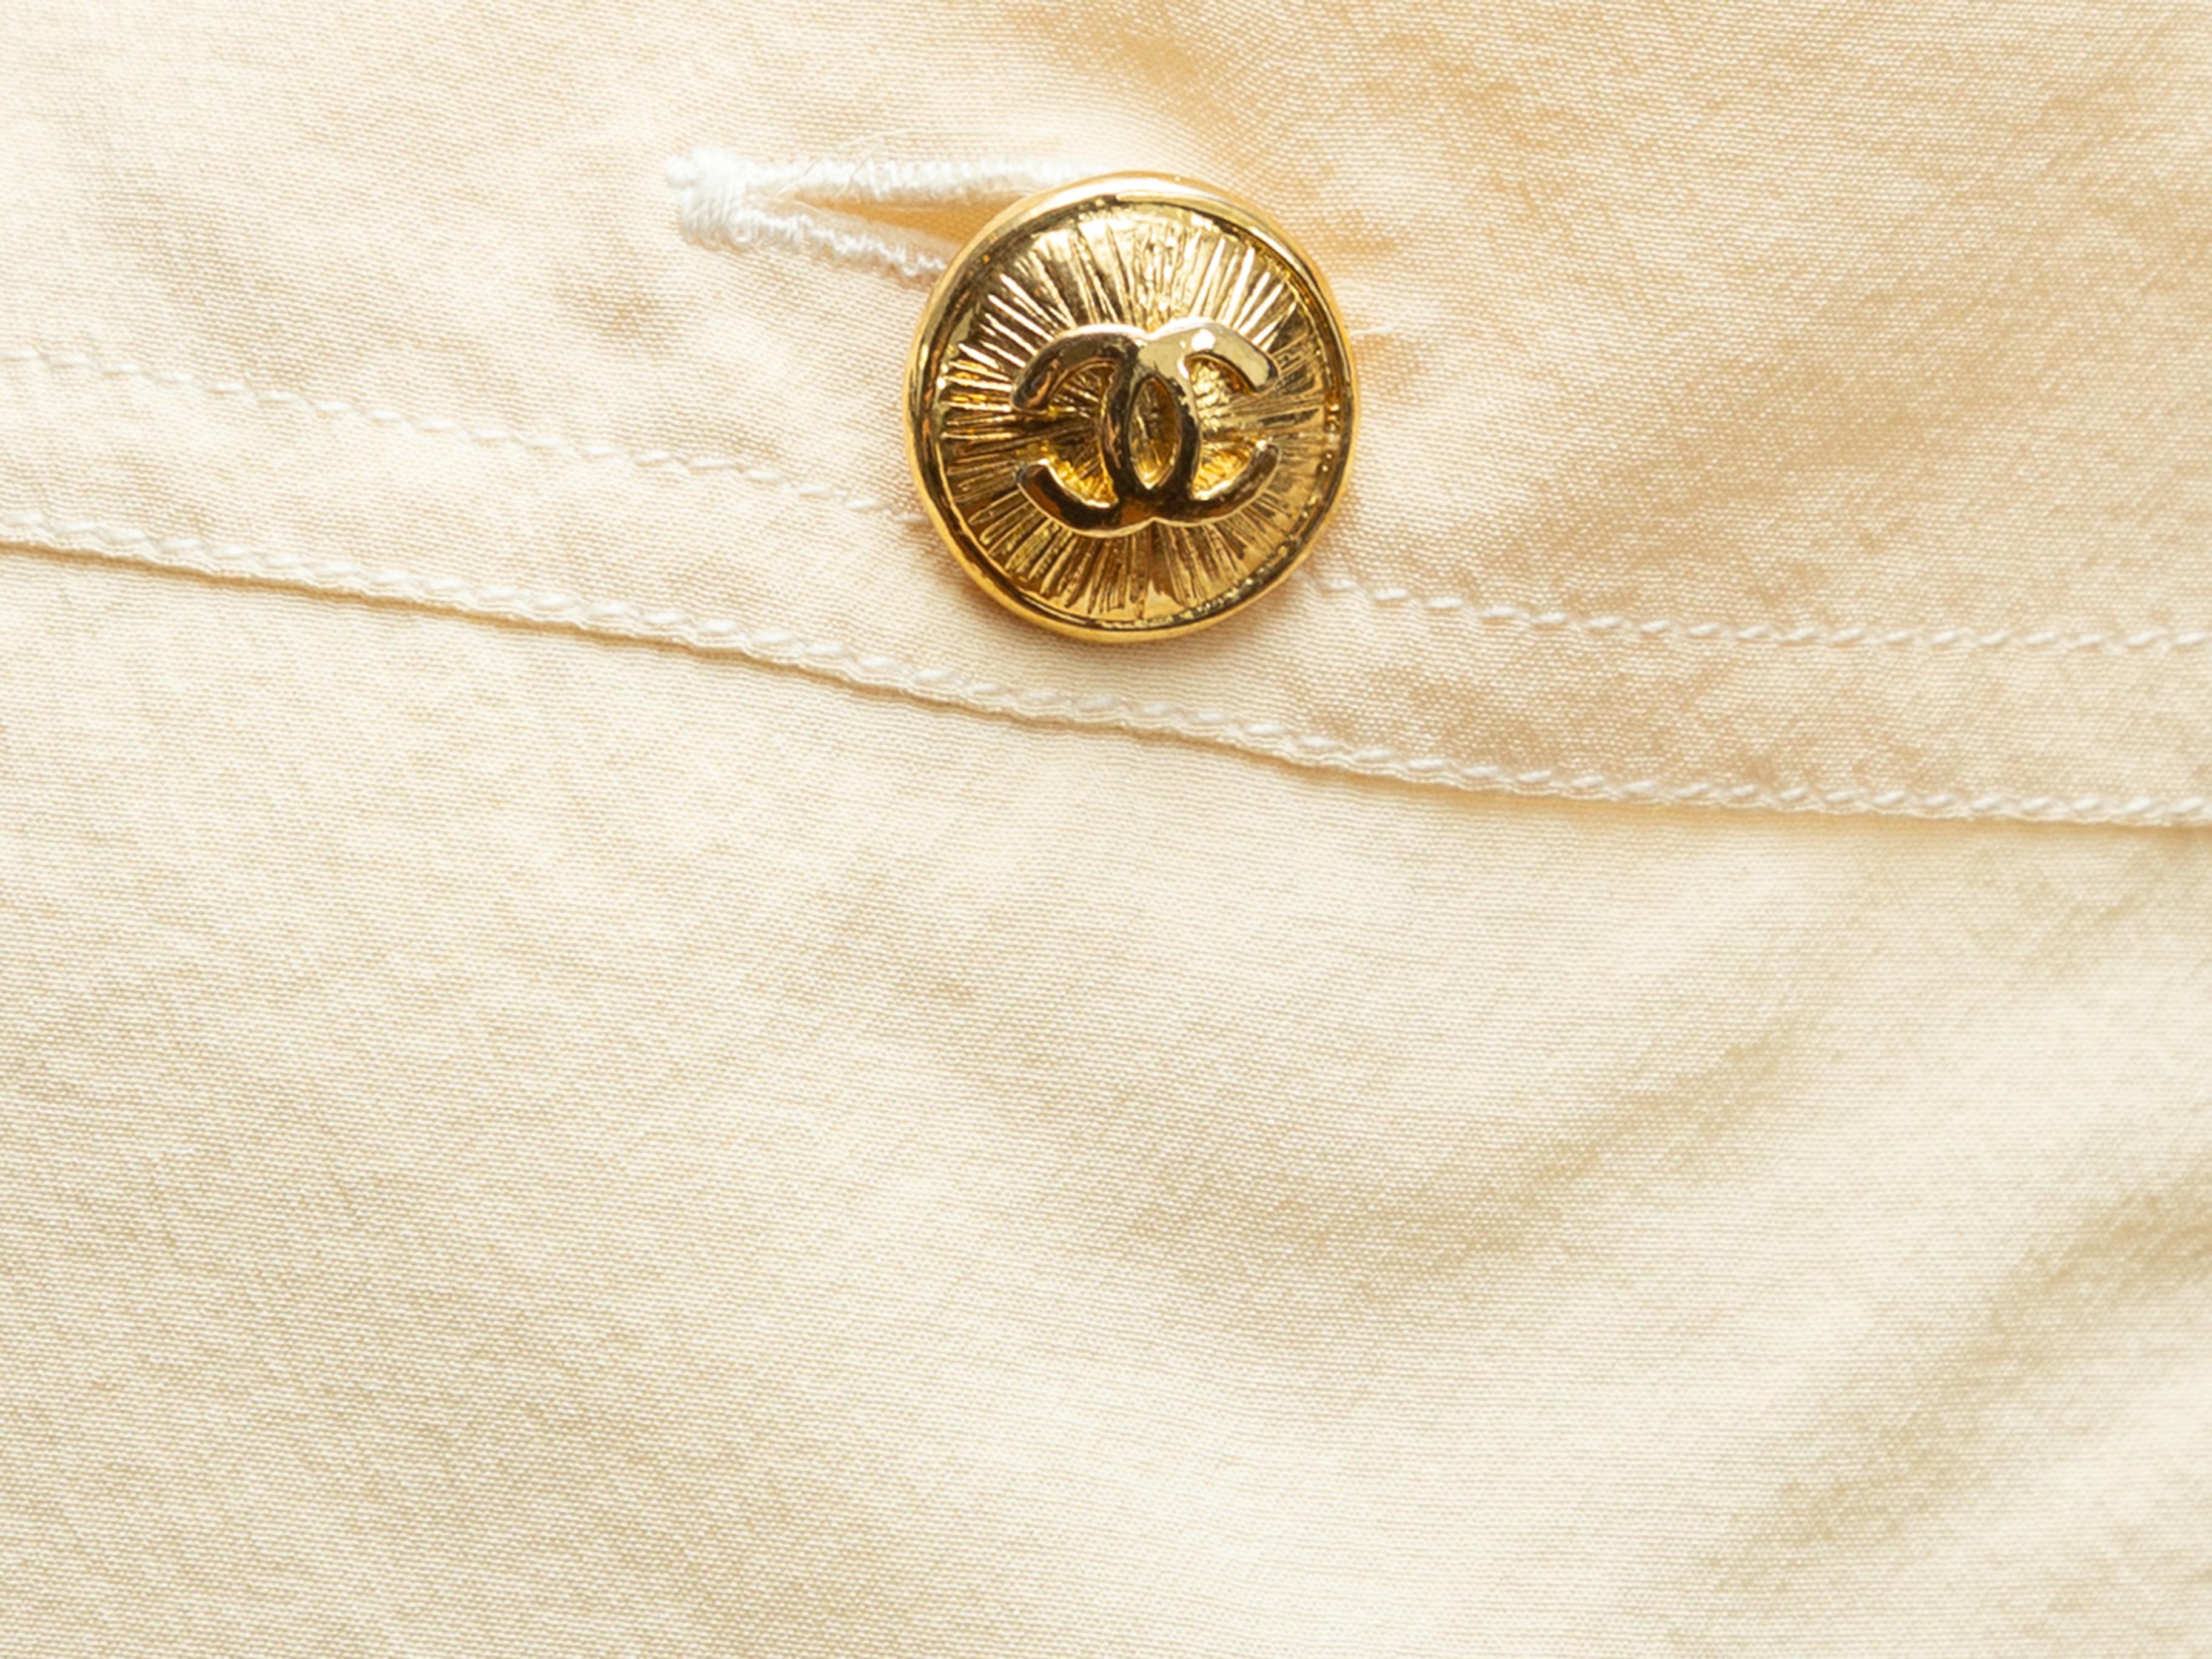 Product details: Vintage cream short sleeve top by Chanel Boutique. Crew neck. Dual patch pockets at bust featuring button accents. Gold-tone CC button closures at nape. 36